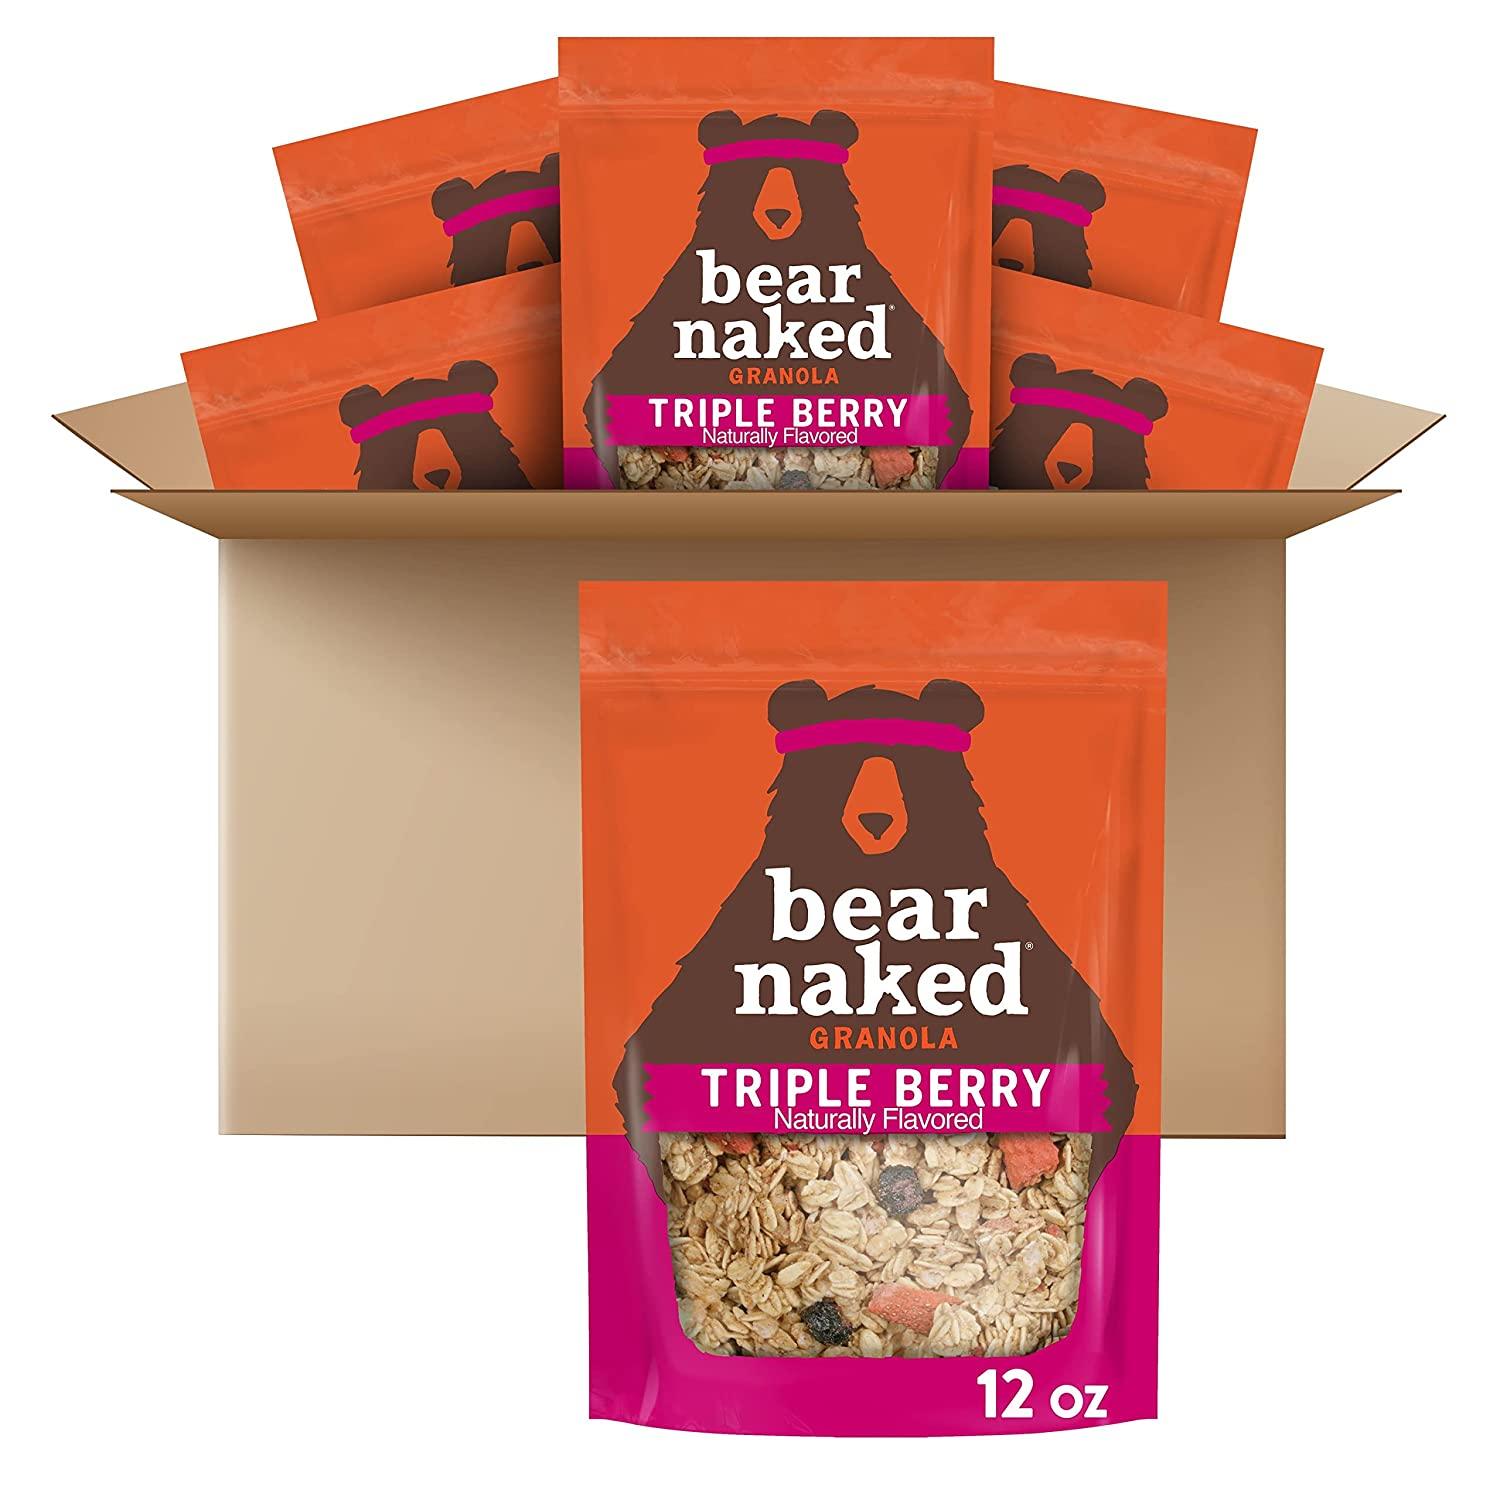 6 Bear Naked Triple Berry Granola for $21.55 Shipped